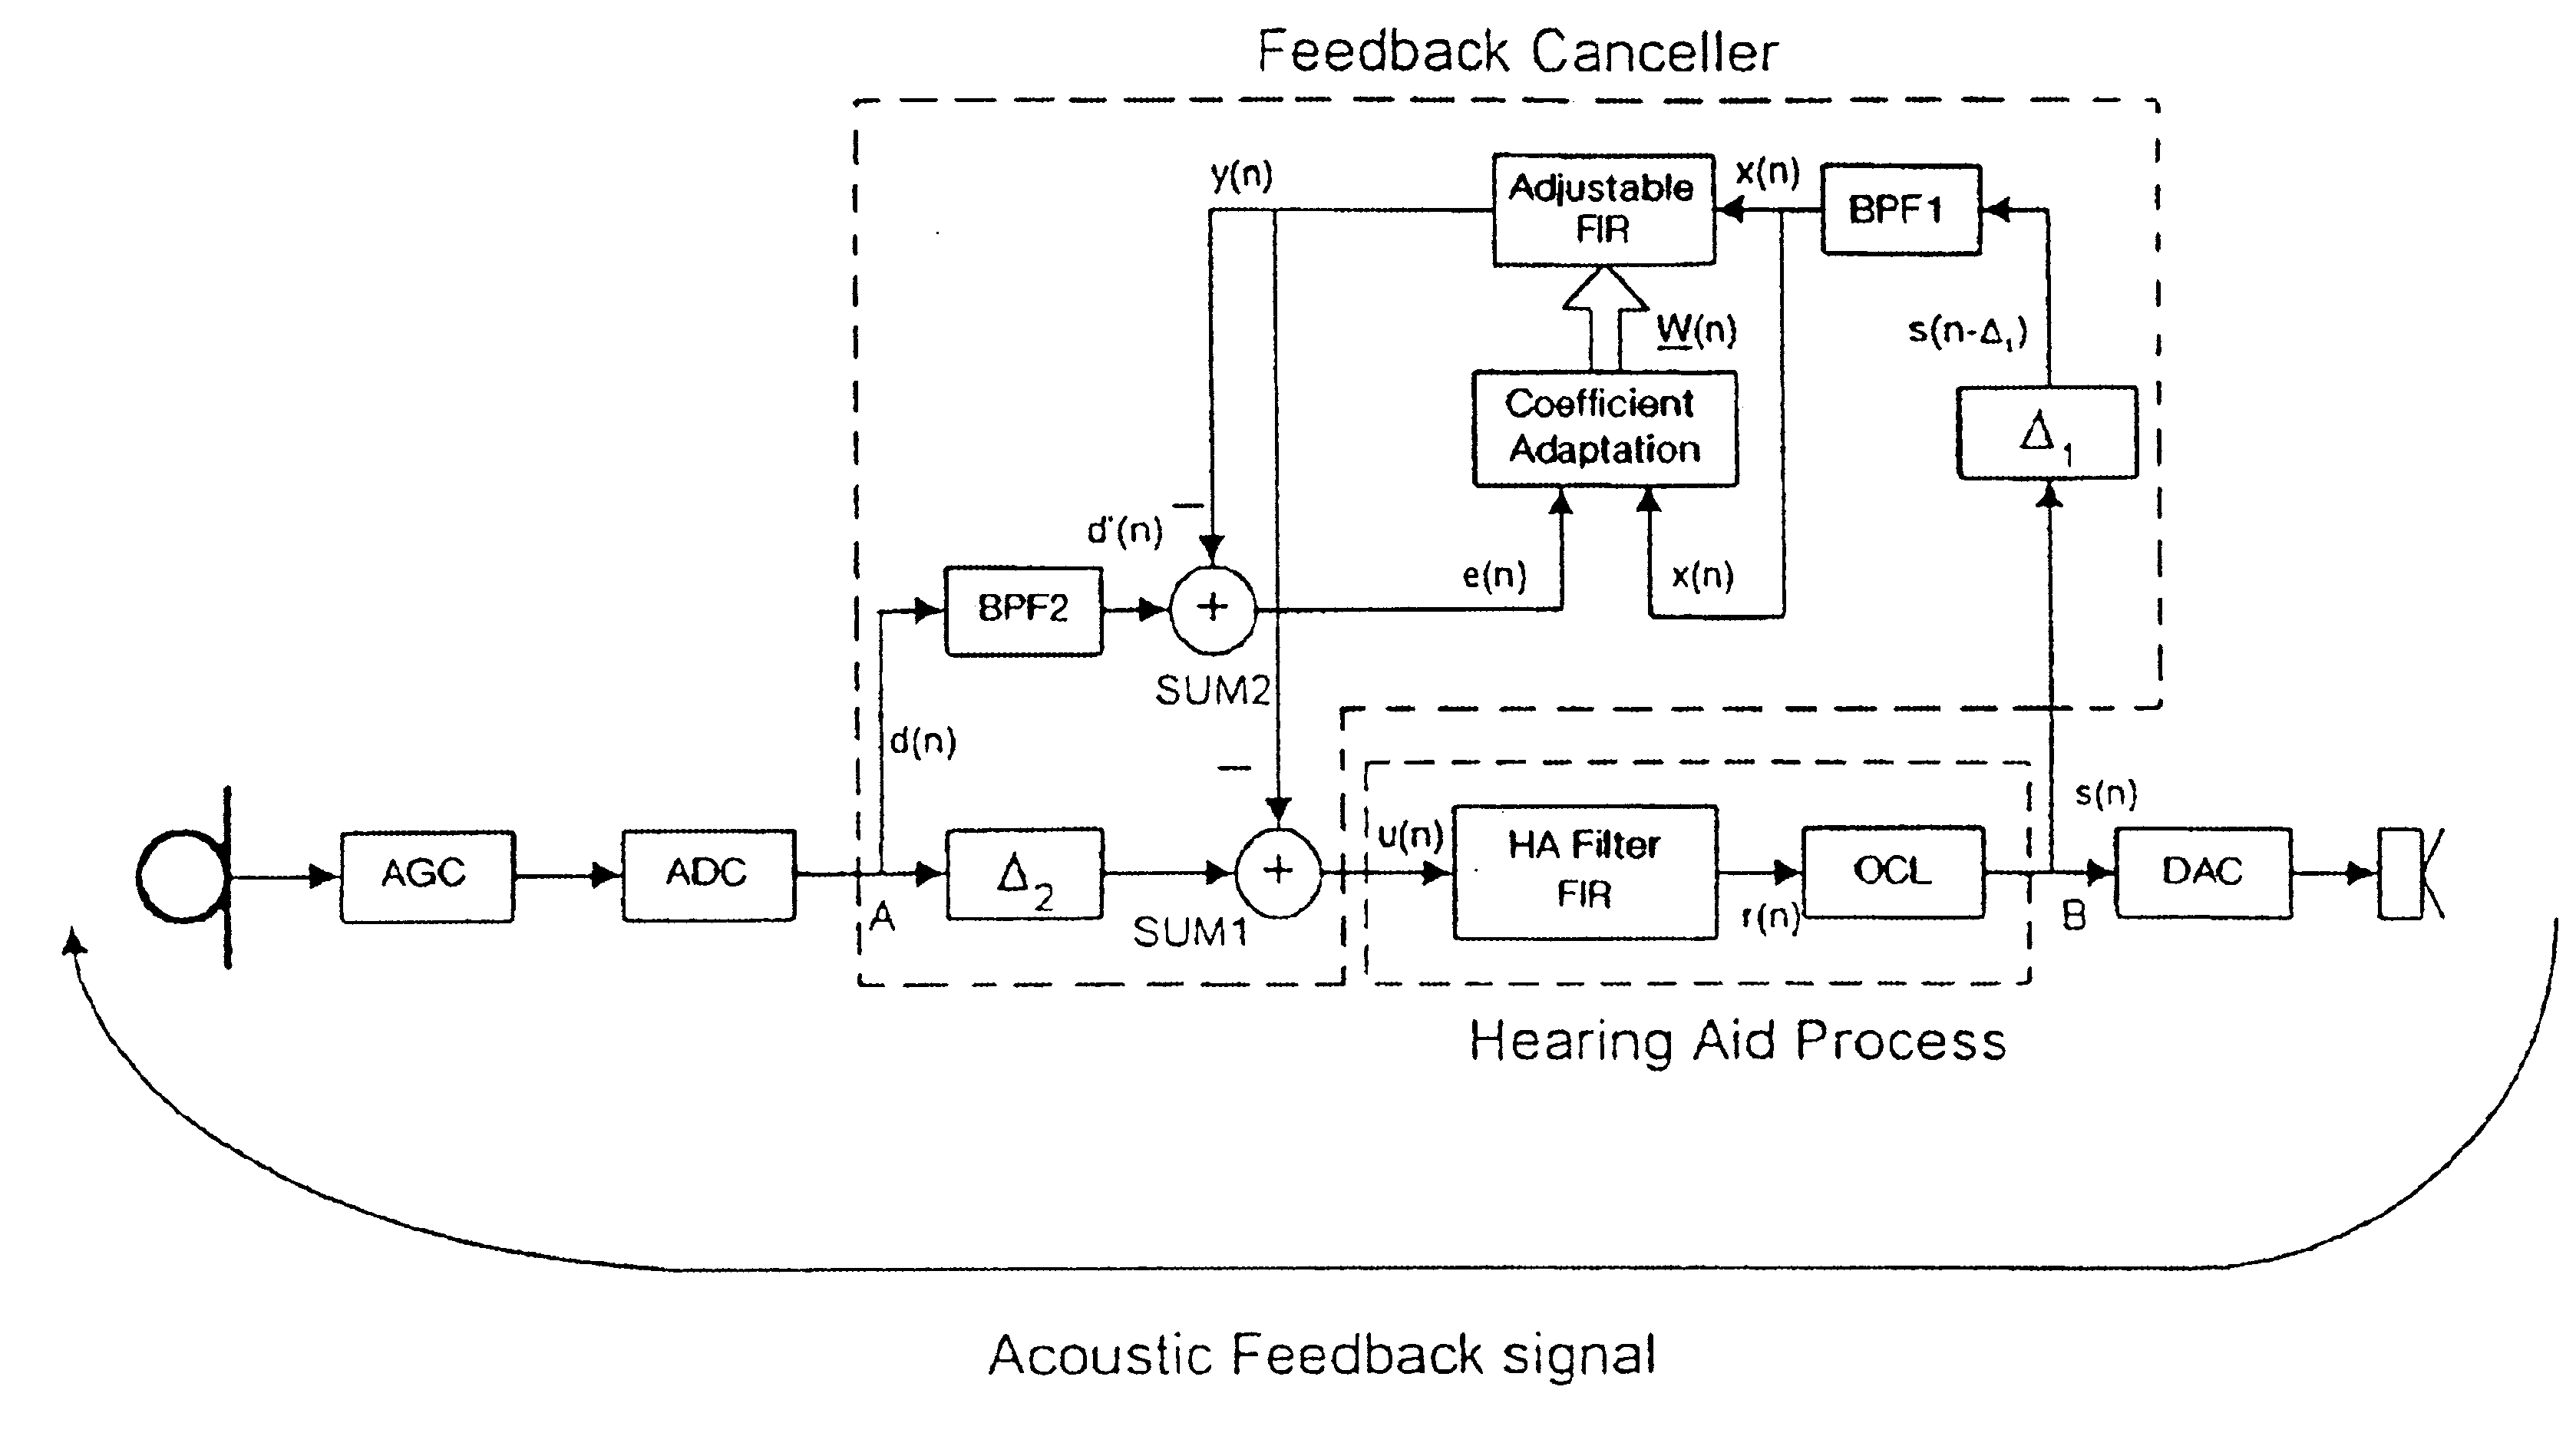 Band-limited adaptive feedback canceller for hearing aids